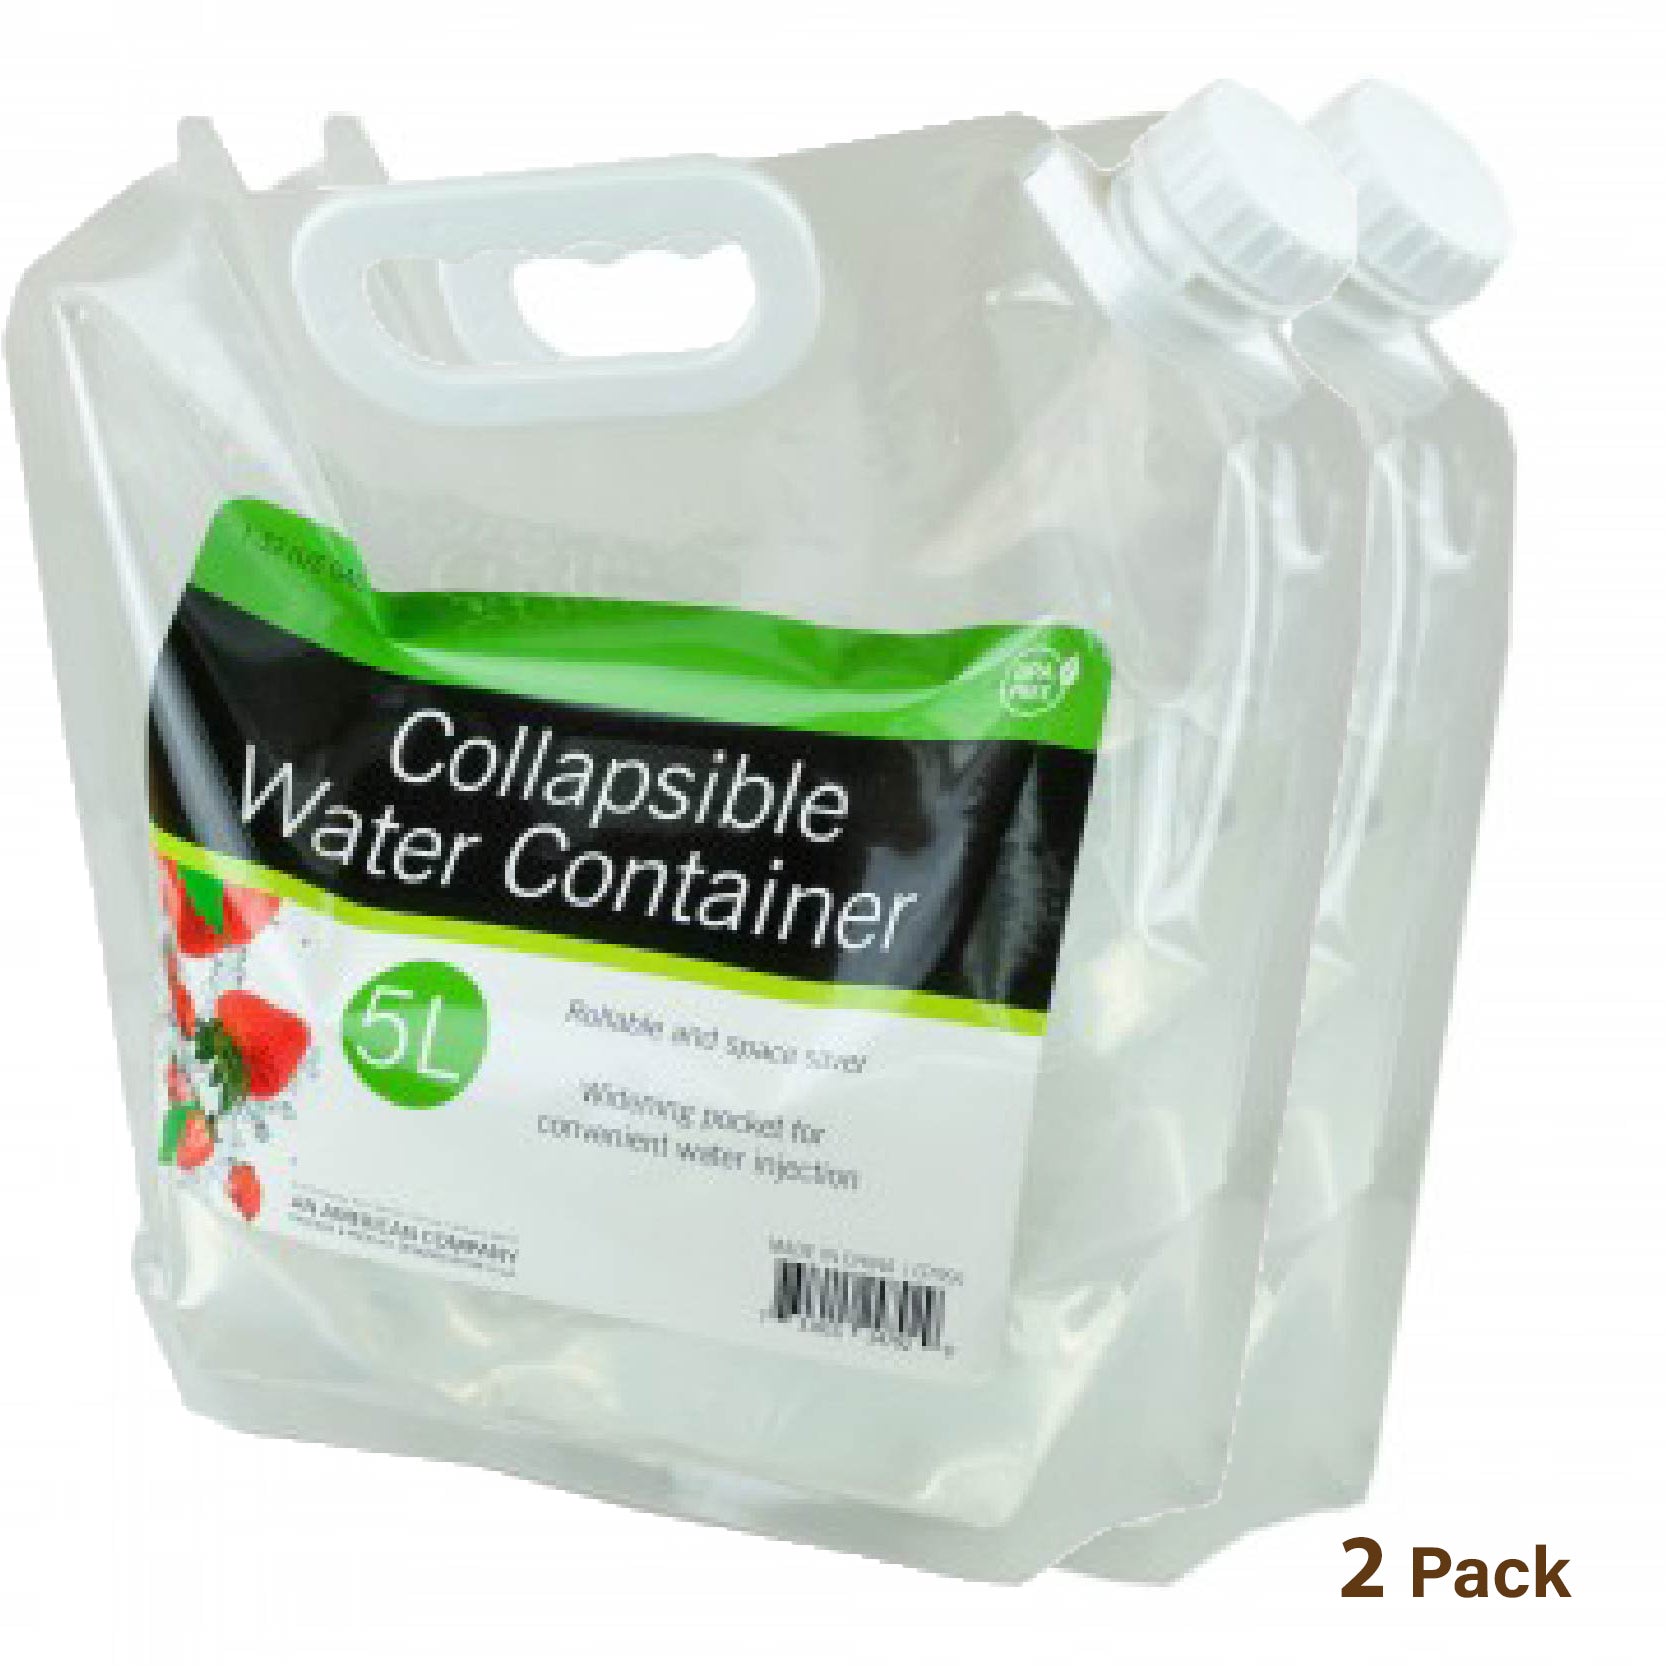 Portable Camping Collapsible Water Container - 5 Liters | 2 Pack, Water, Pacific Rayne, Defiance Outdoor Gear Co.